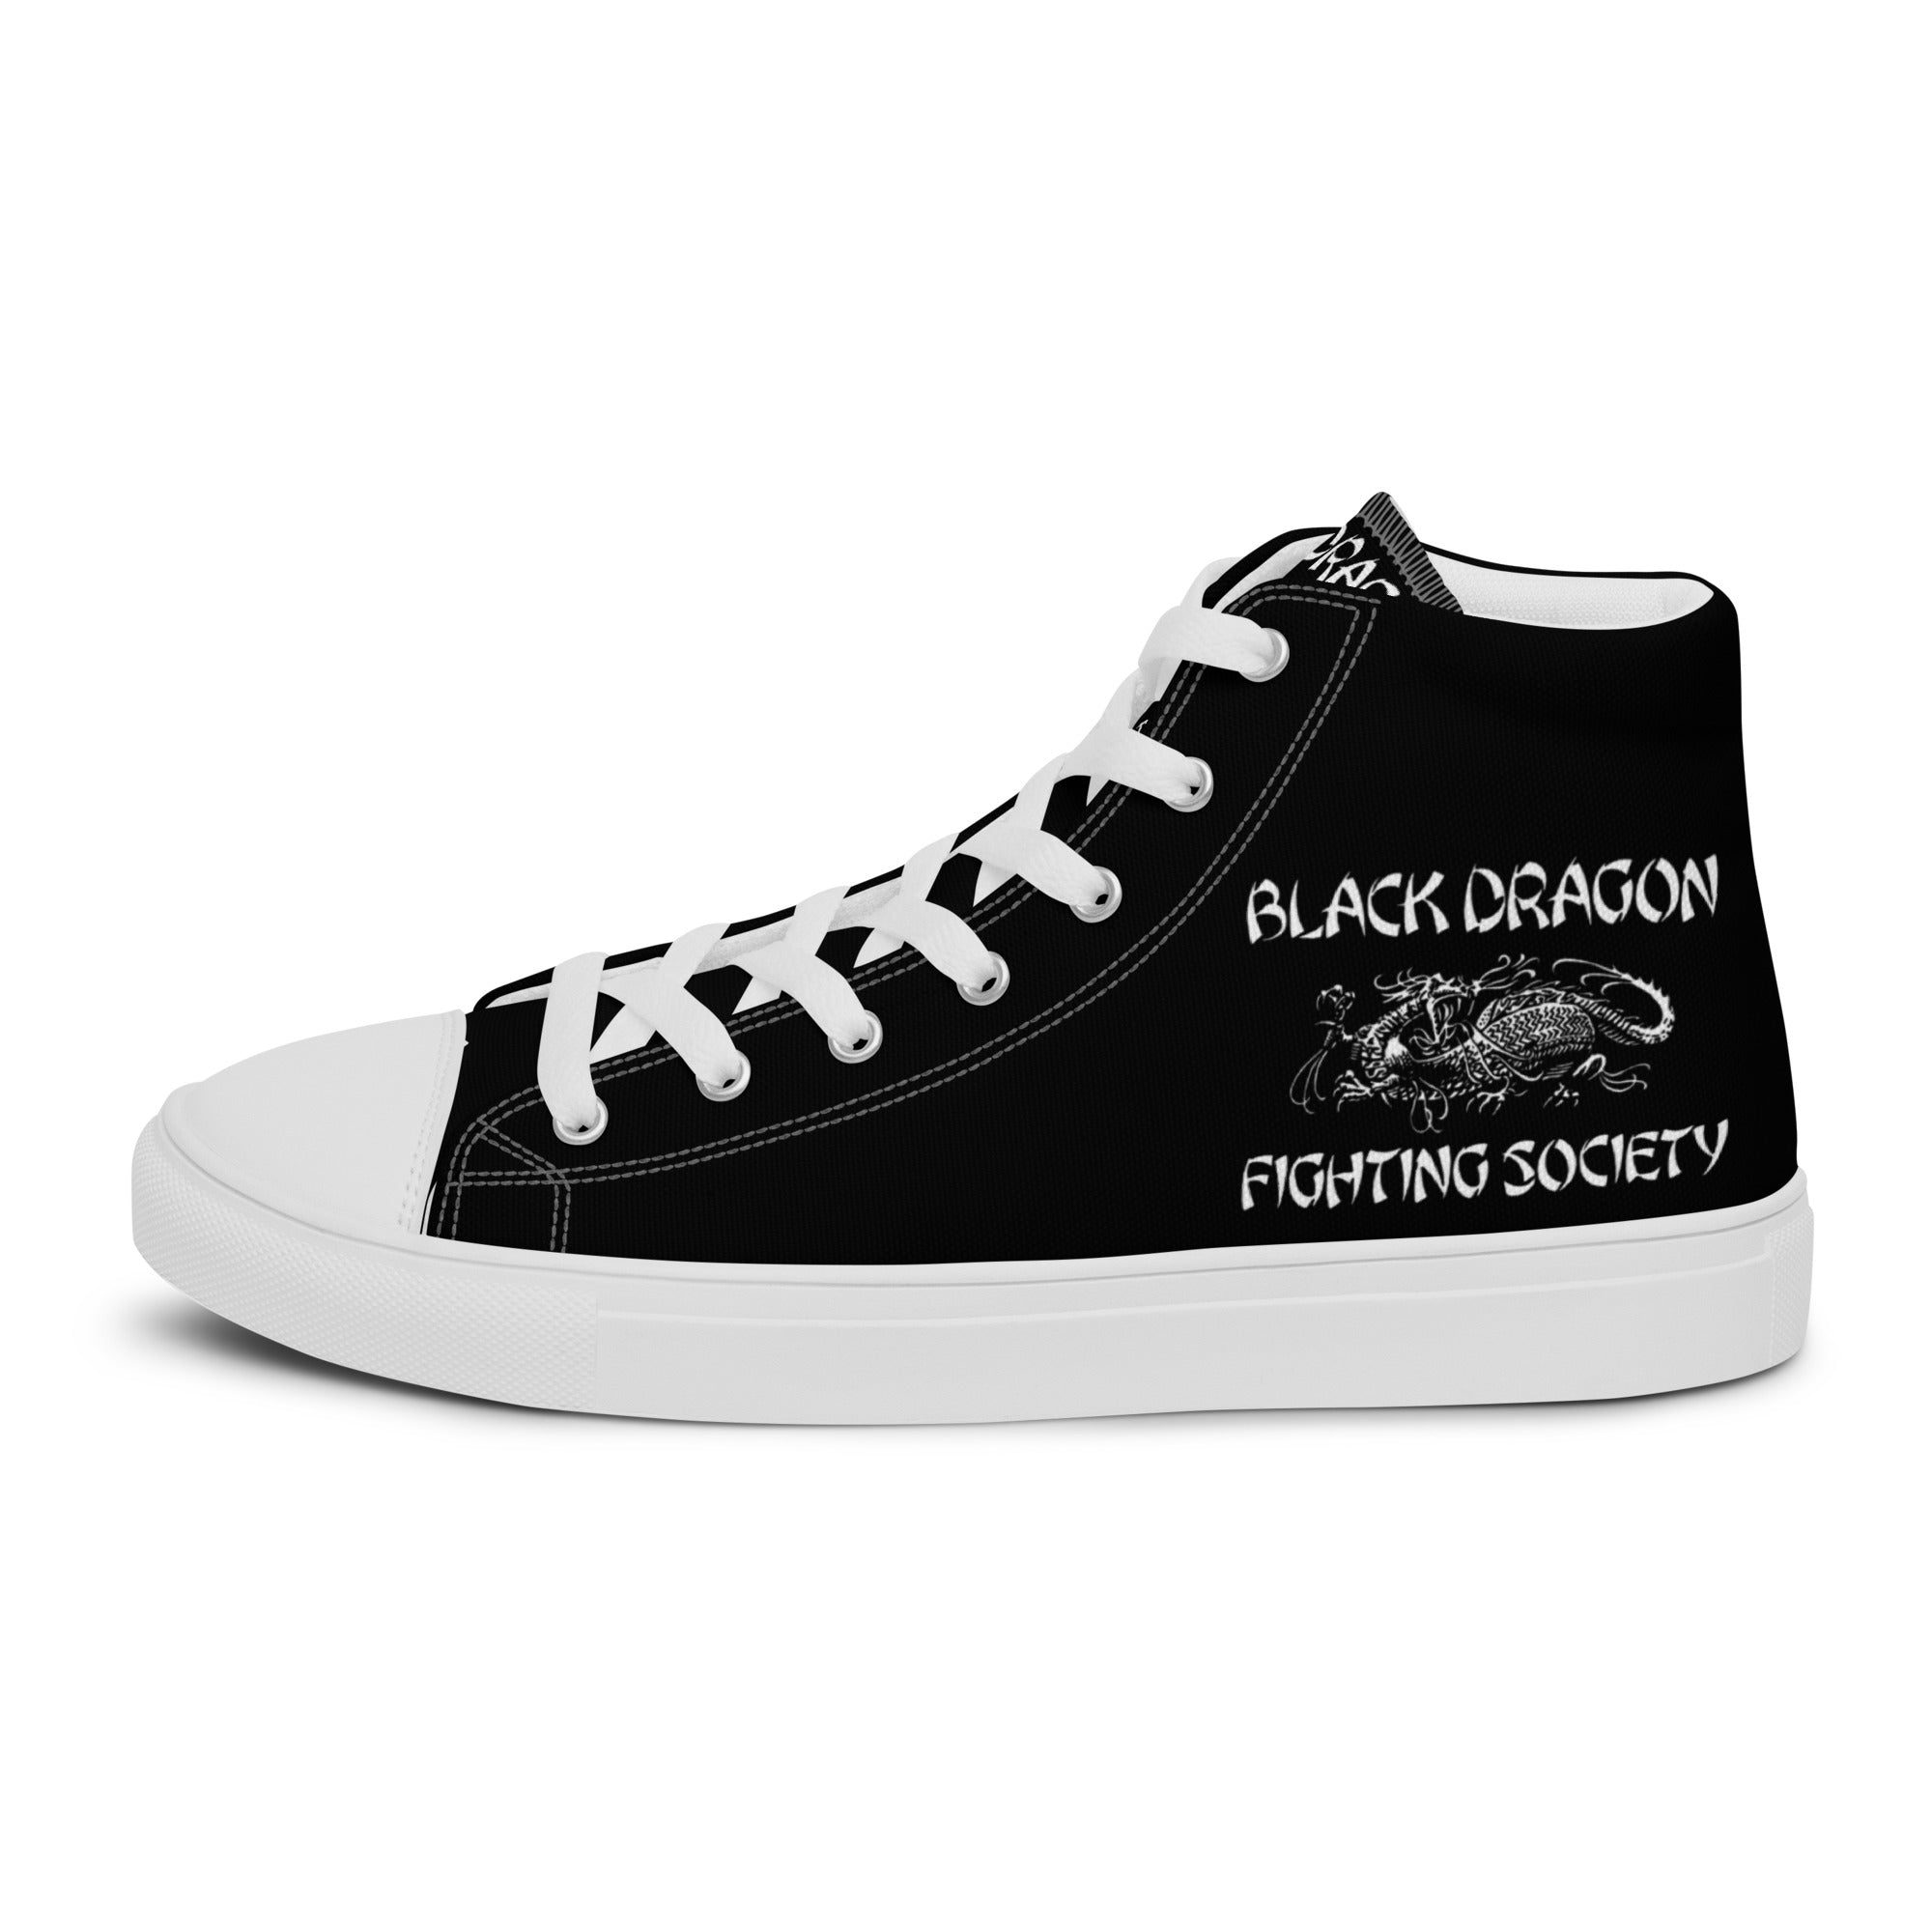 Men’s high top canvas shoes – BLACK DRAGON FIGHTING SOCIETY